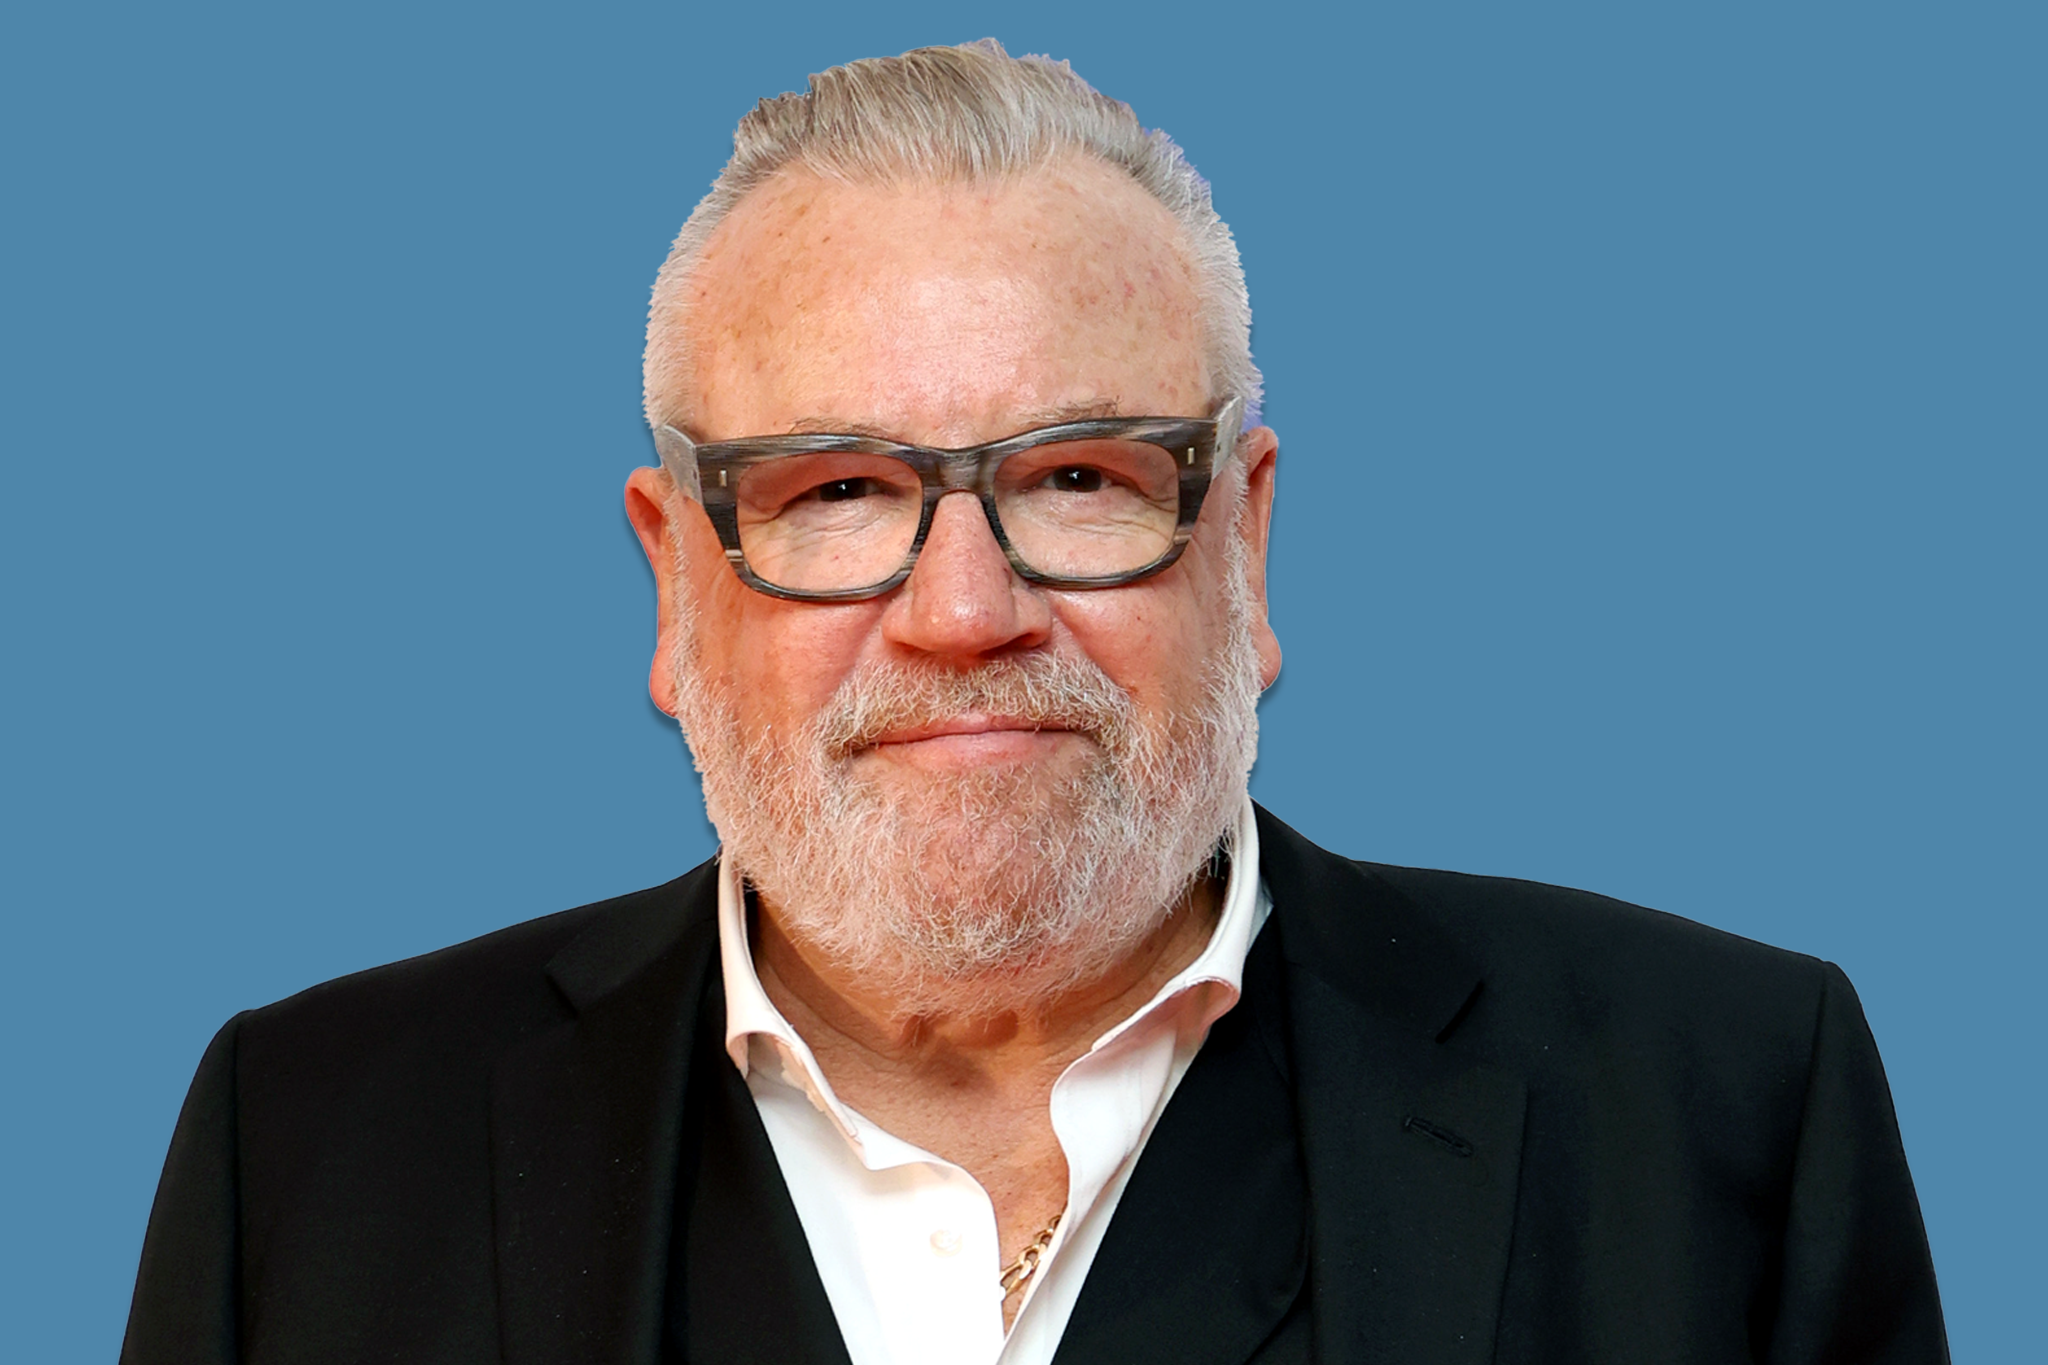 Ray Winstone: ‘There’s no need for it... this feeling of being above everyone else. We all end up in the same hole in the ground’